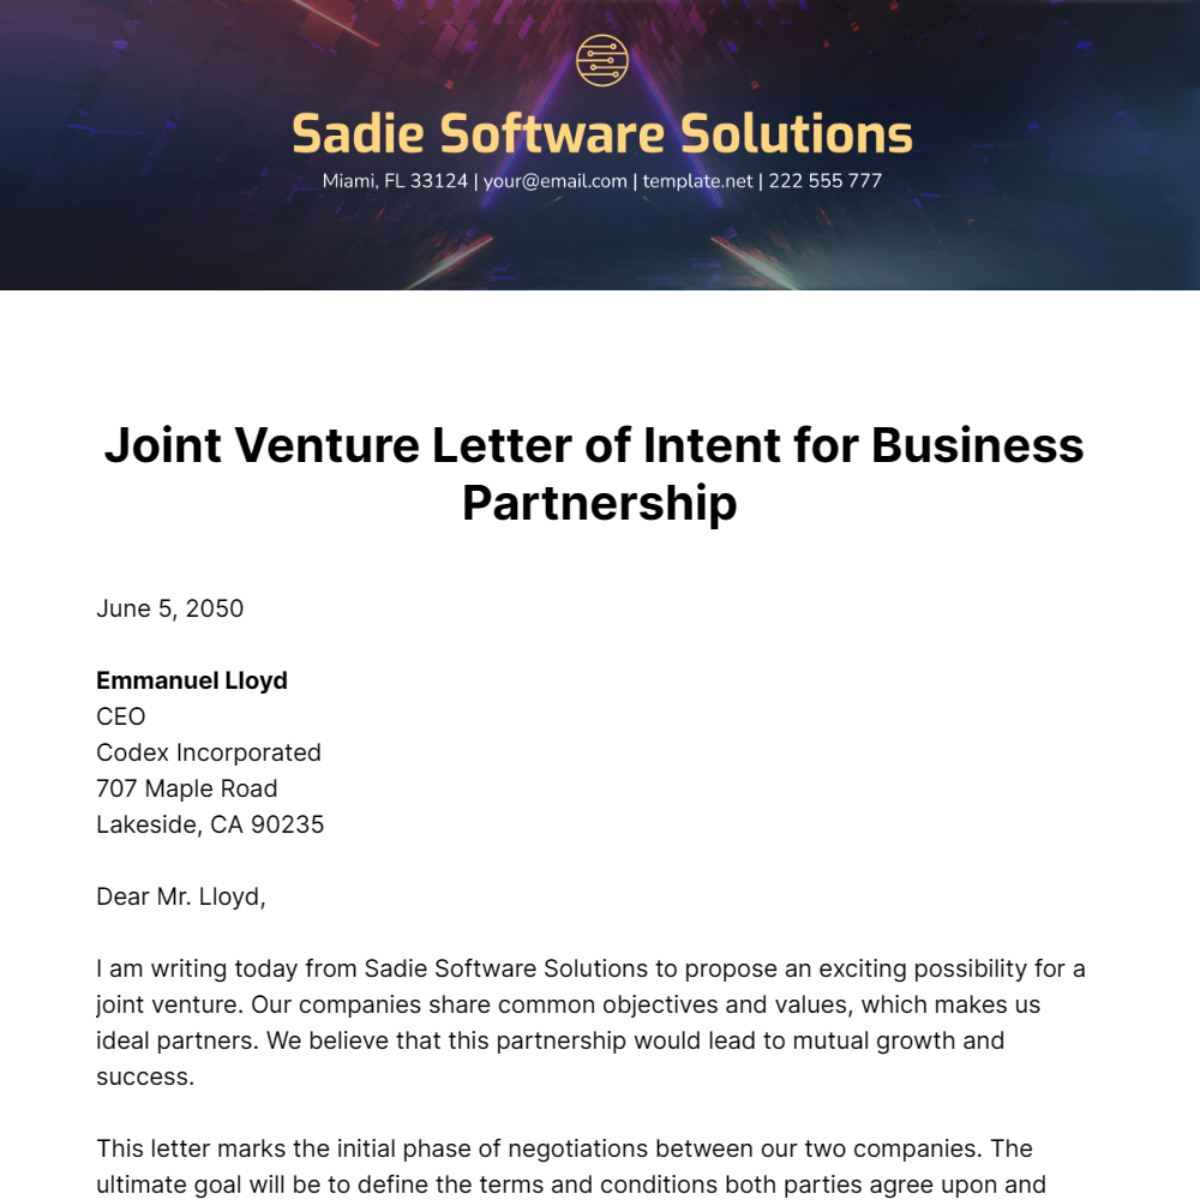 Free Joint Venture Letter of Intent for Business Partnership Template